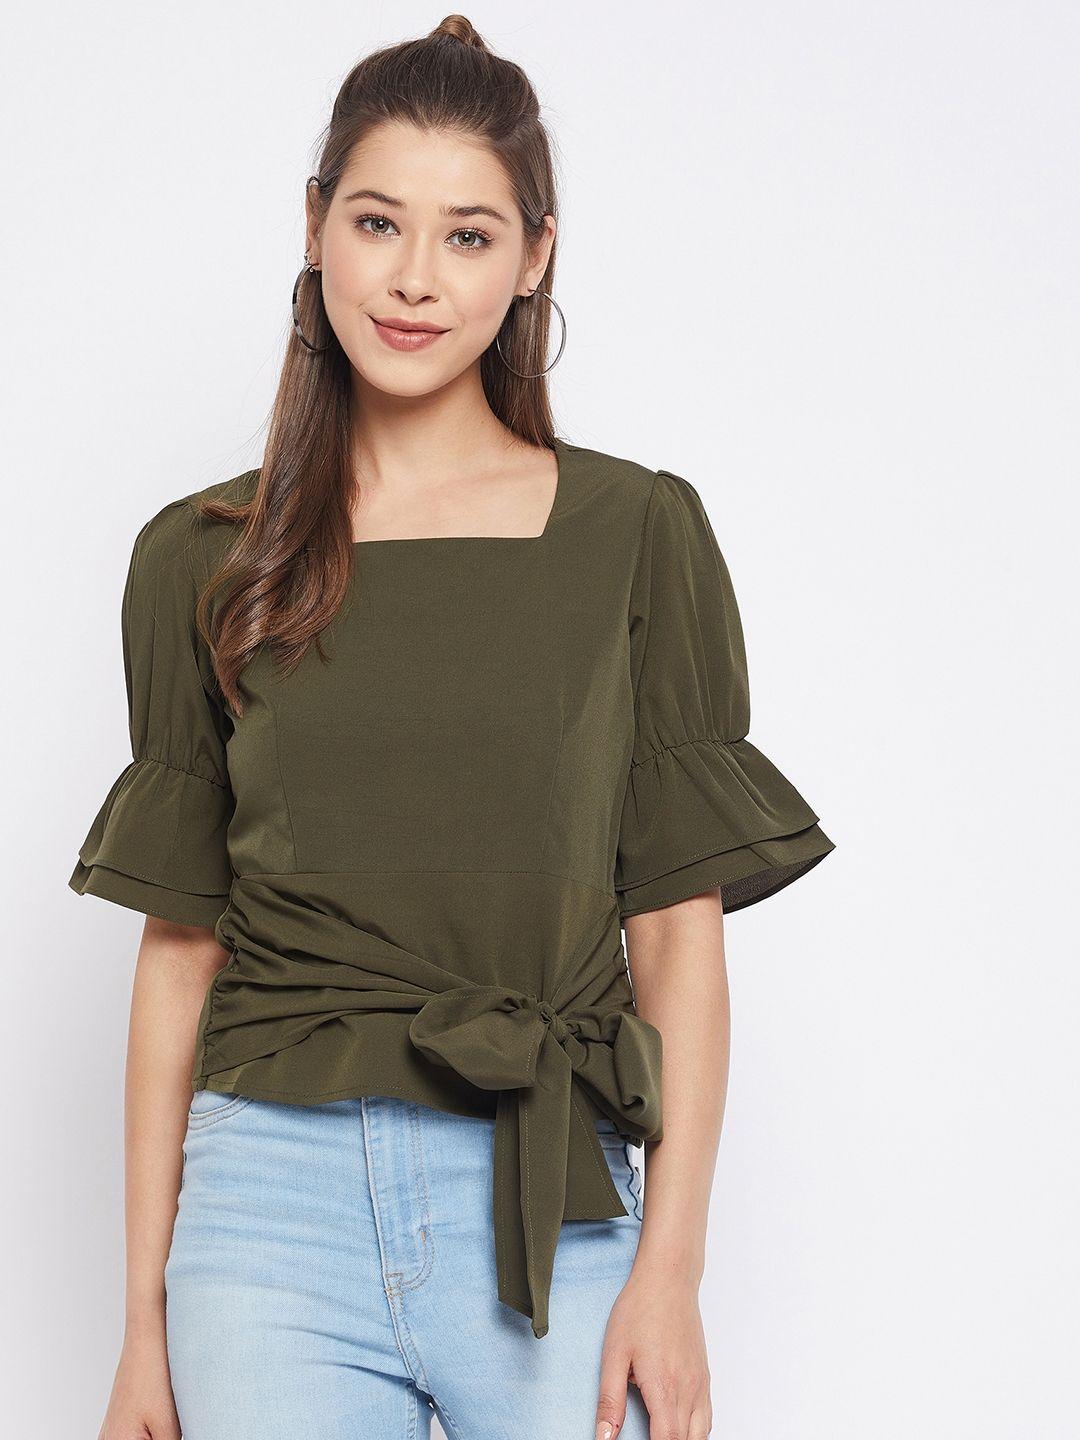 winered women olive green crepe top